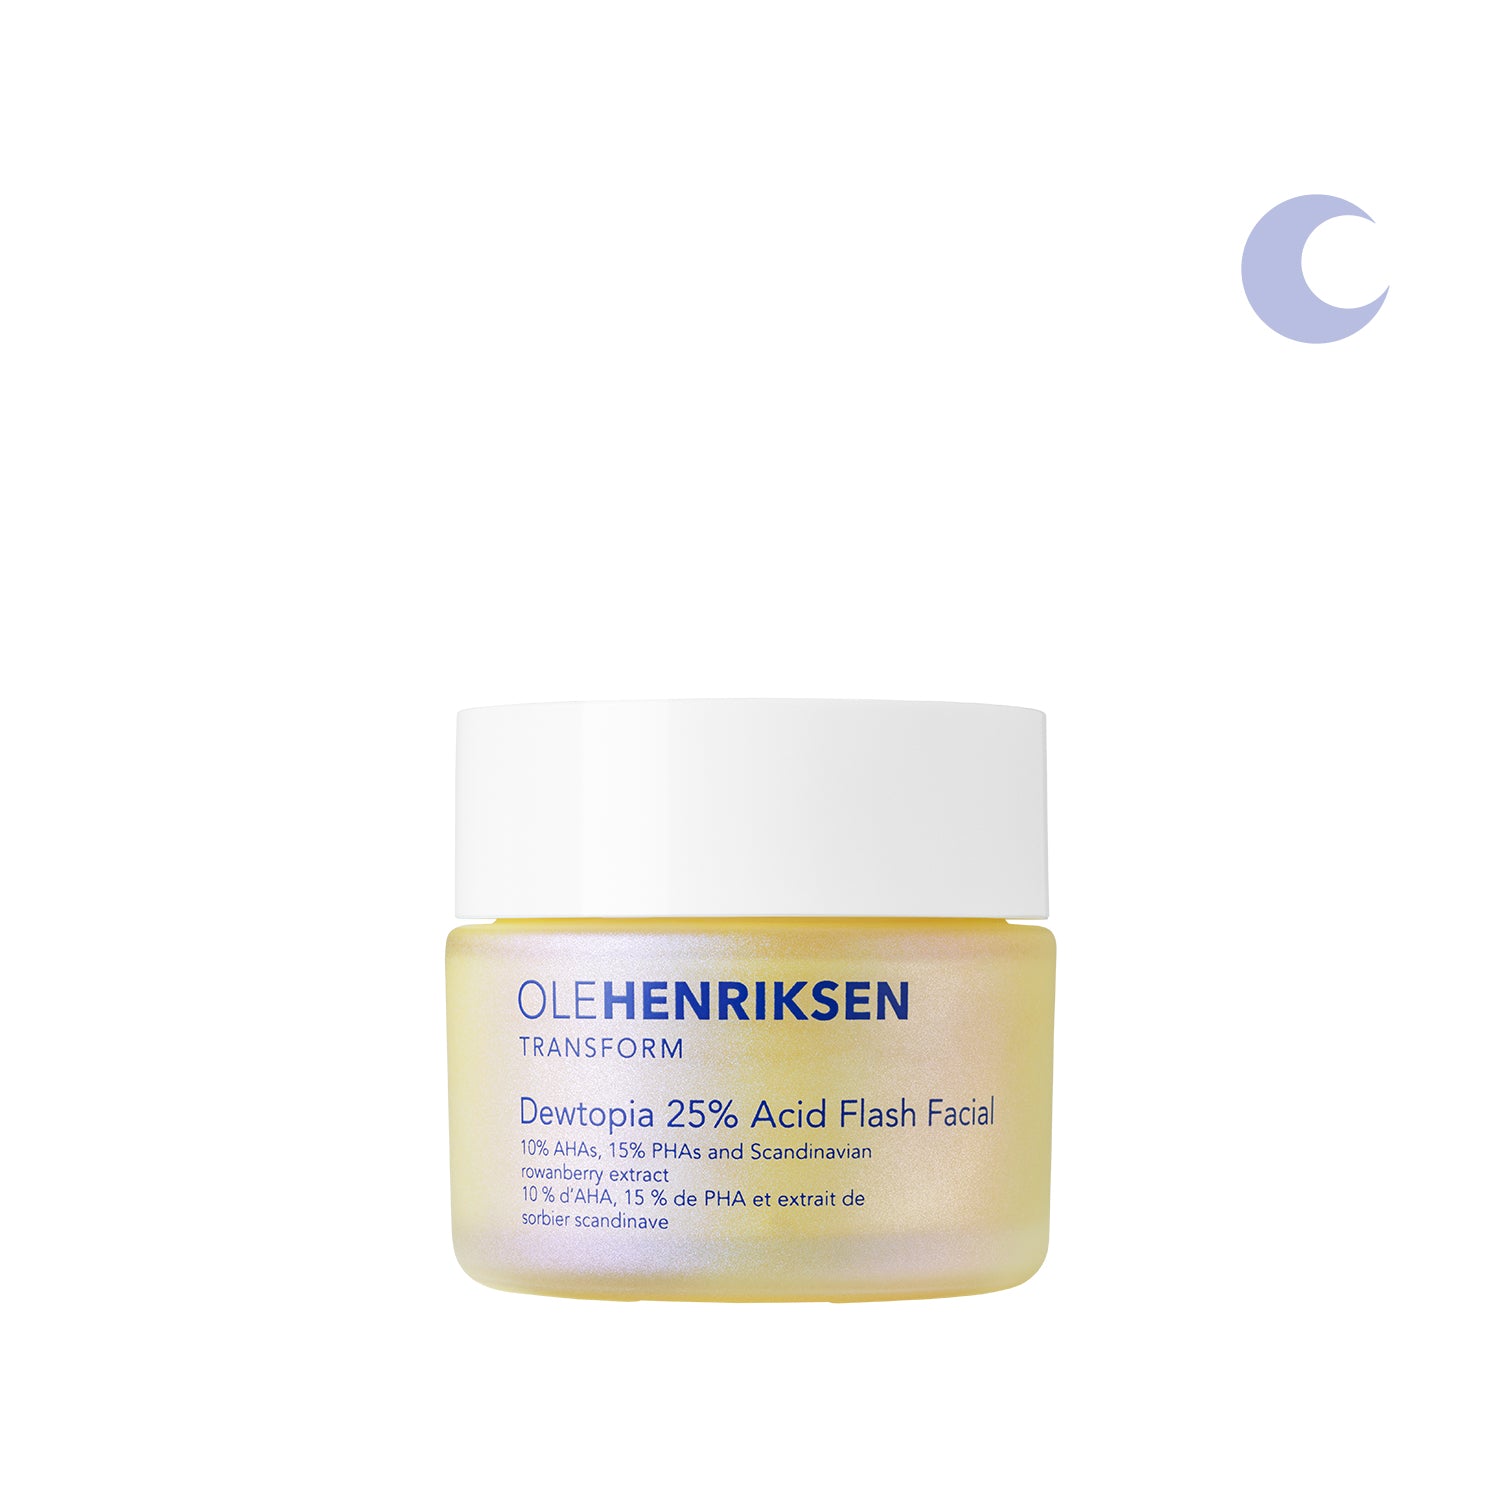 We Got First Dibs on a Ole Henriksen Dewtopia Facial Mask Review